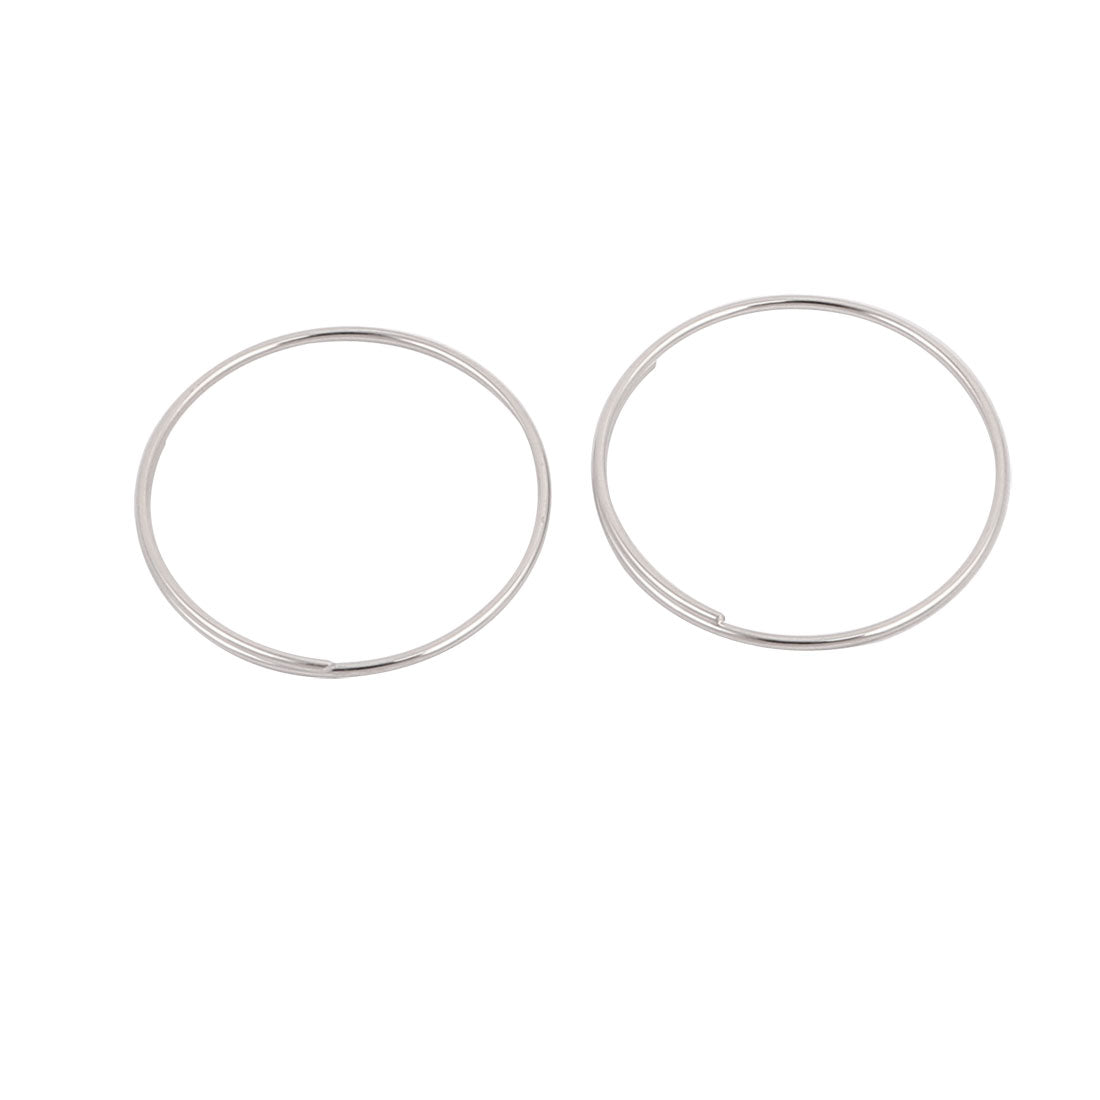 uxcell Uxcell 100pcs 20mm Outer Diameter Chandelier Connector Steel Ring O-ring Silver Tone